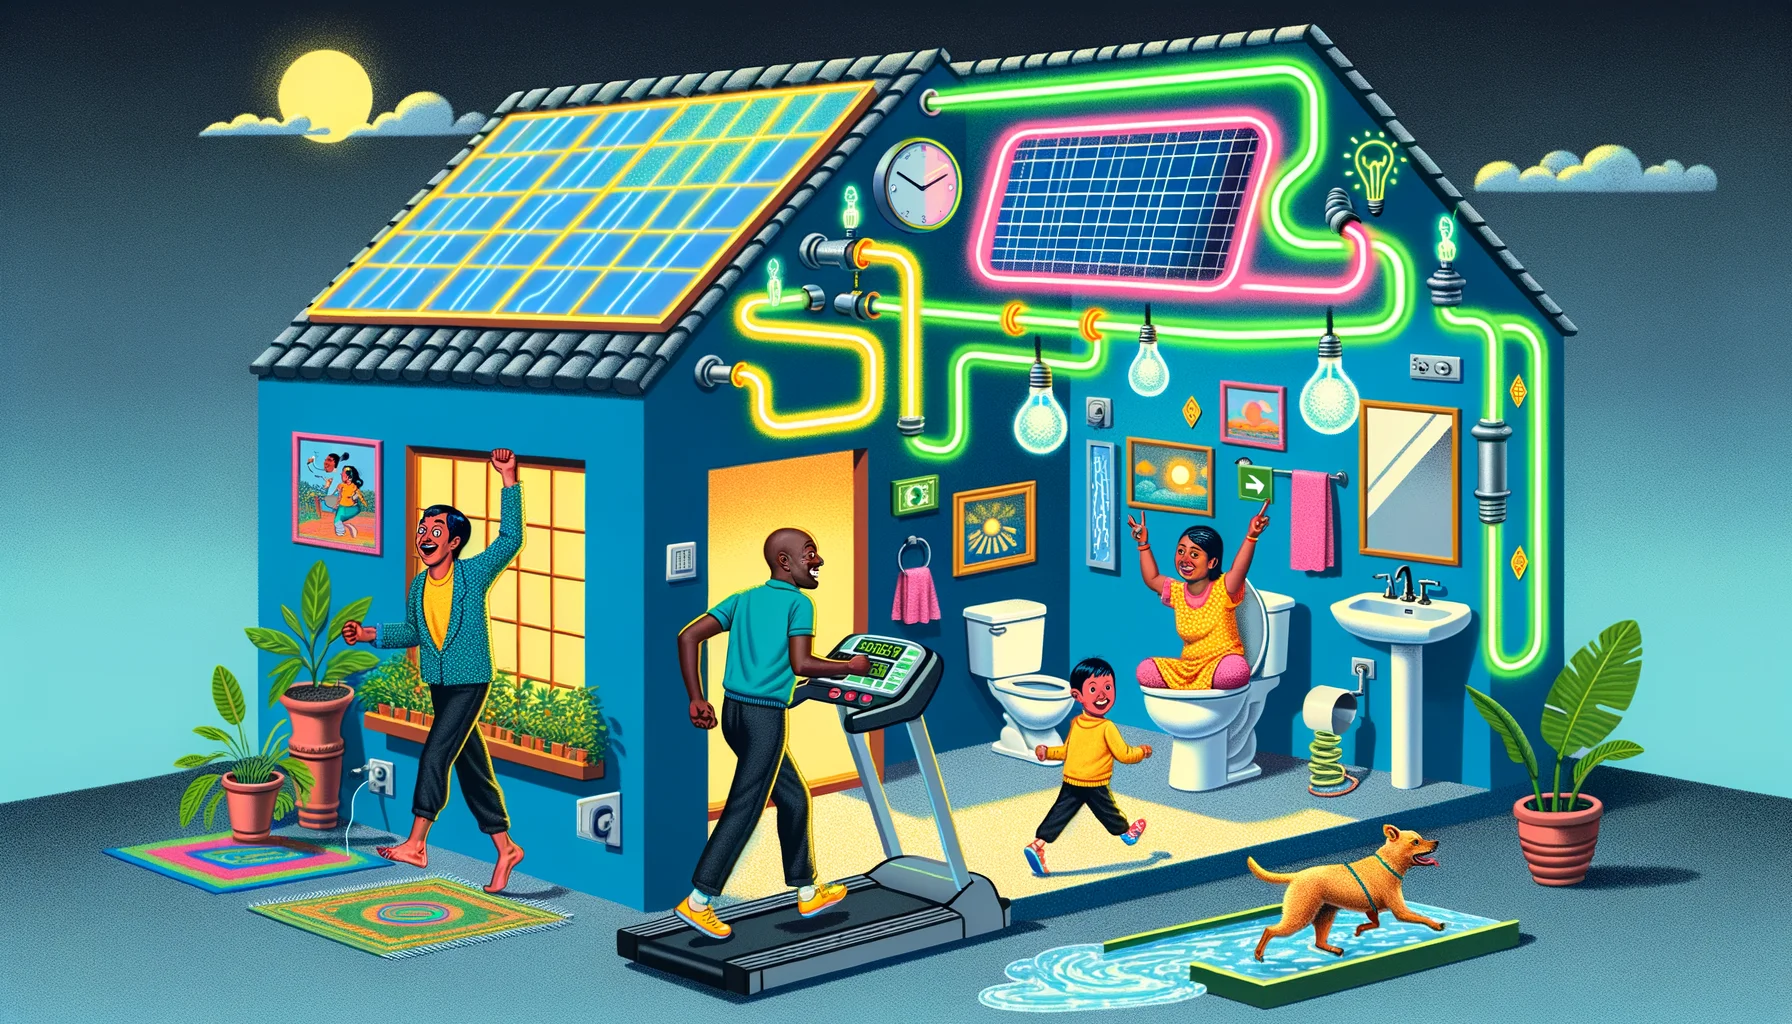 Generate a humorously depicted image on the theme of energy efficiency. In the scene, a family consisting of a Black mother, a Caucasian father, and their South Asian adopted child are enjoying an overly exaggerated energy-efficient life inside their home. Neon lights are powered by a treadmill where the dog is running. The toilet flushes with rainwater collected outside, indicated by a pipe leading from the roof. In the hallway, the family is using sun-reflecting mirrors instead of lights. On the outside, a solar panel is partially covering the roof, but it's comically shaped like a giant solar-powered cell phone charger.